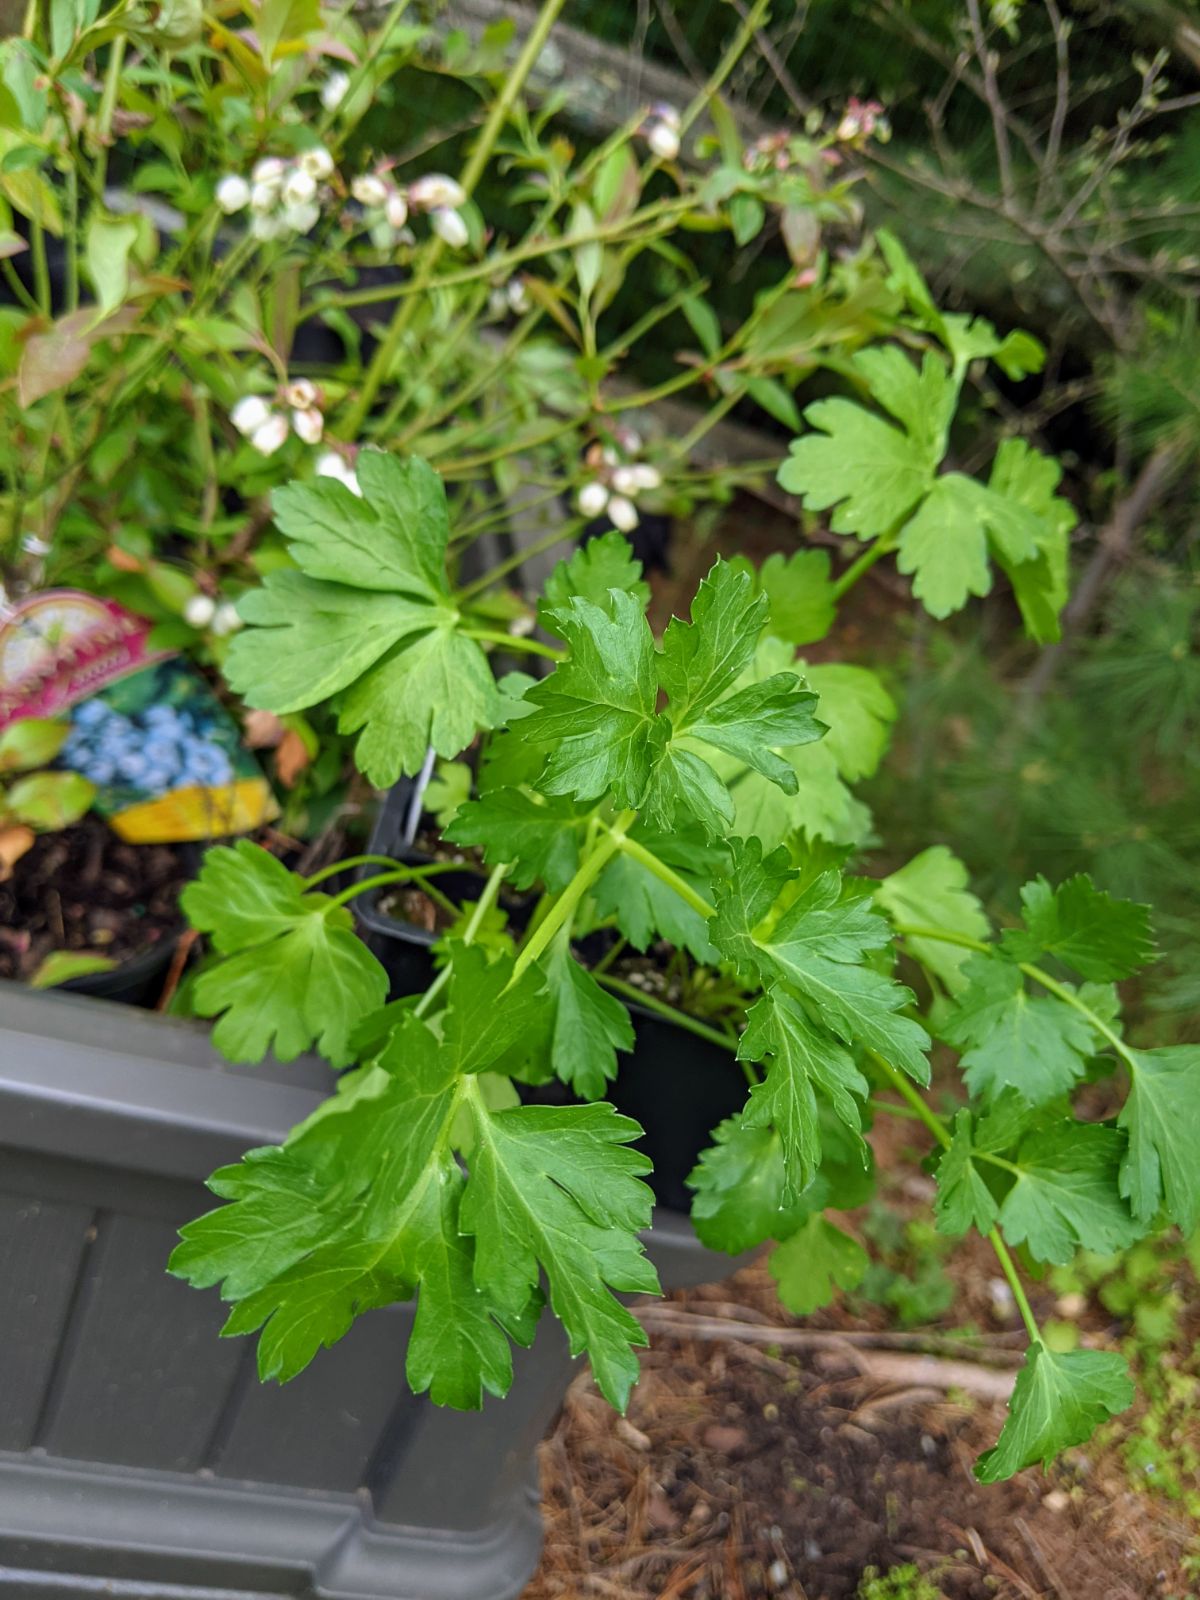 Parsley plants ready to grow next to blueberries in the raised bed